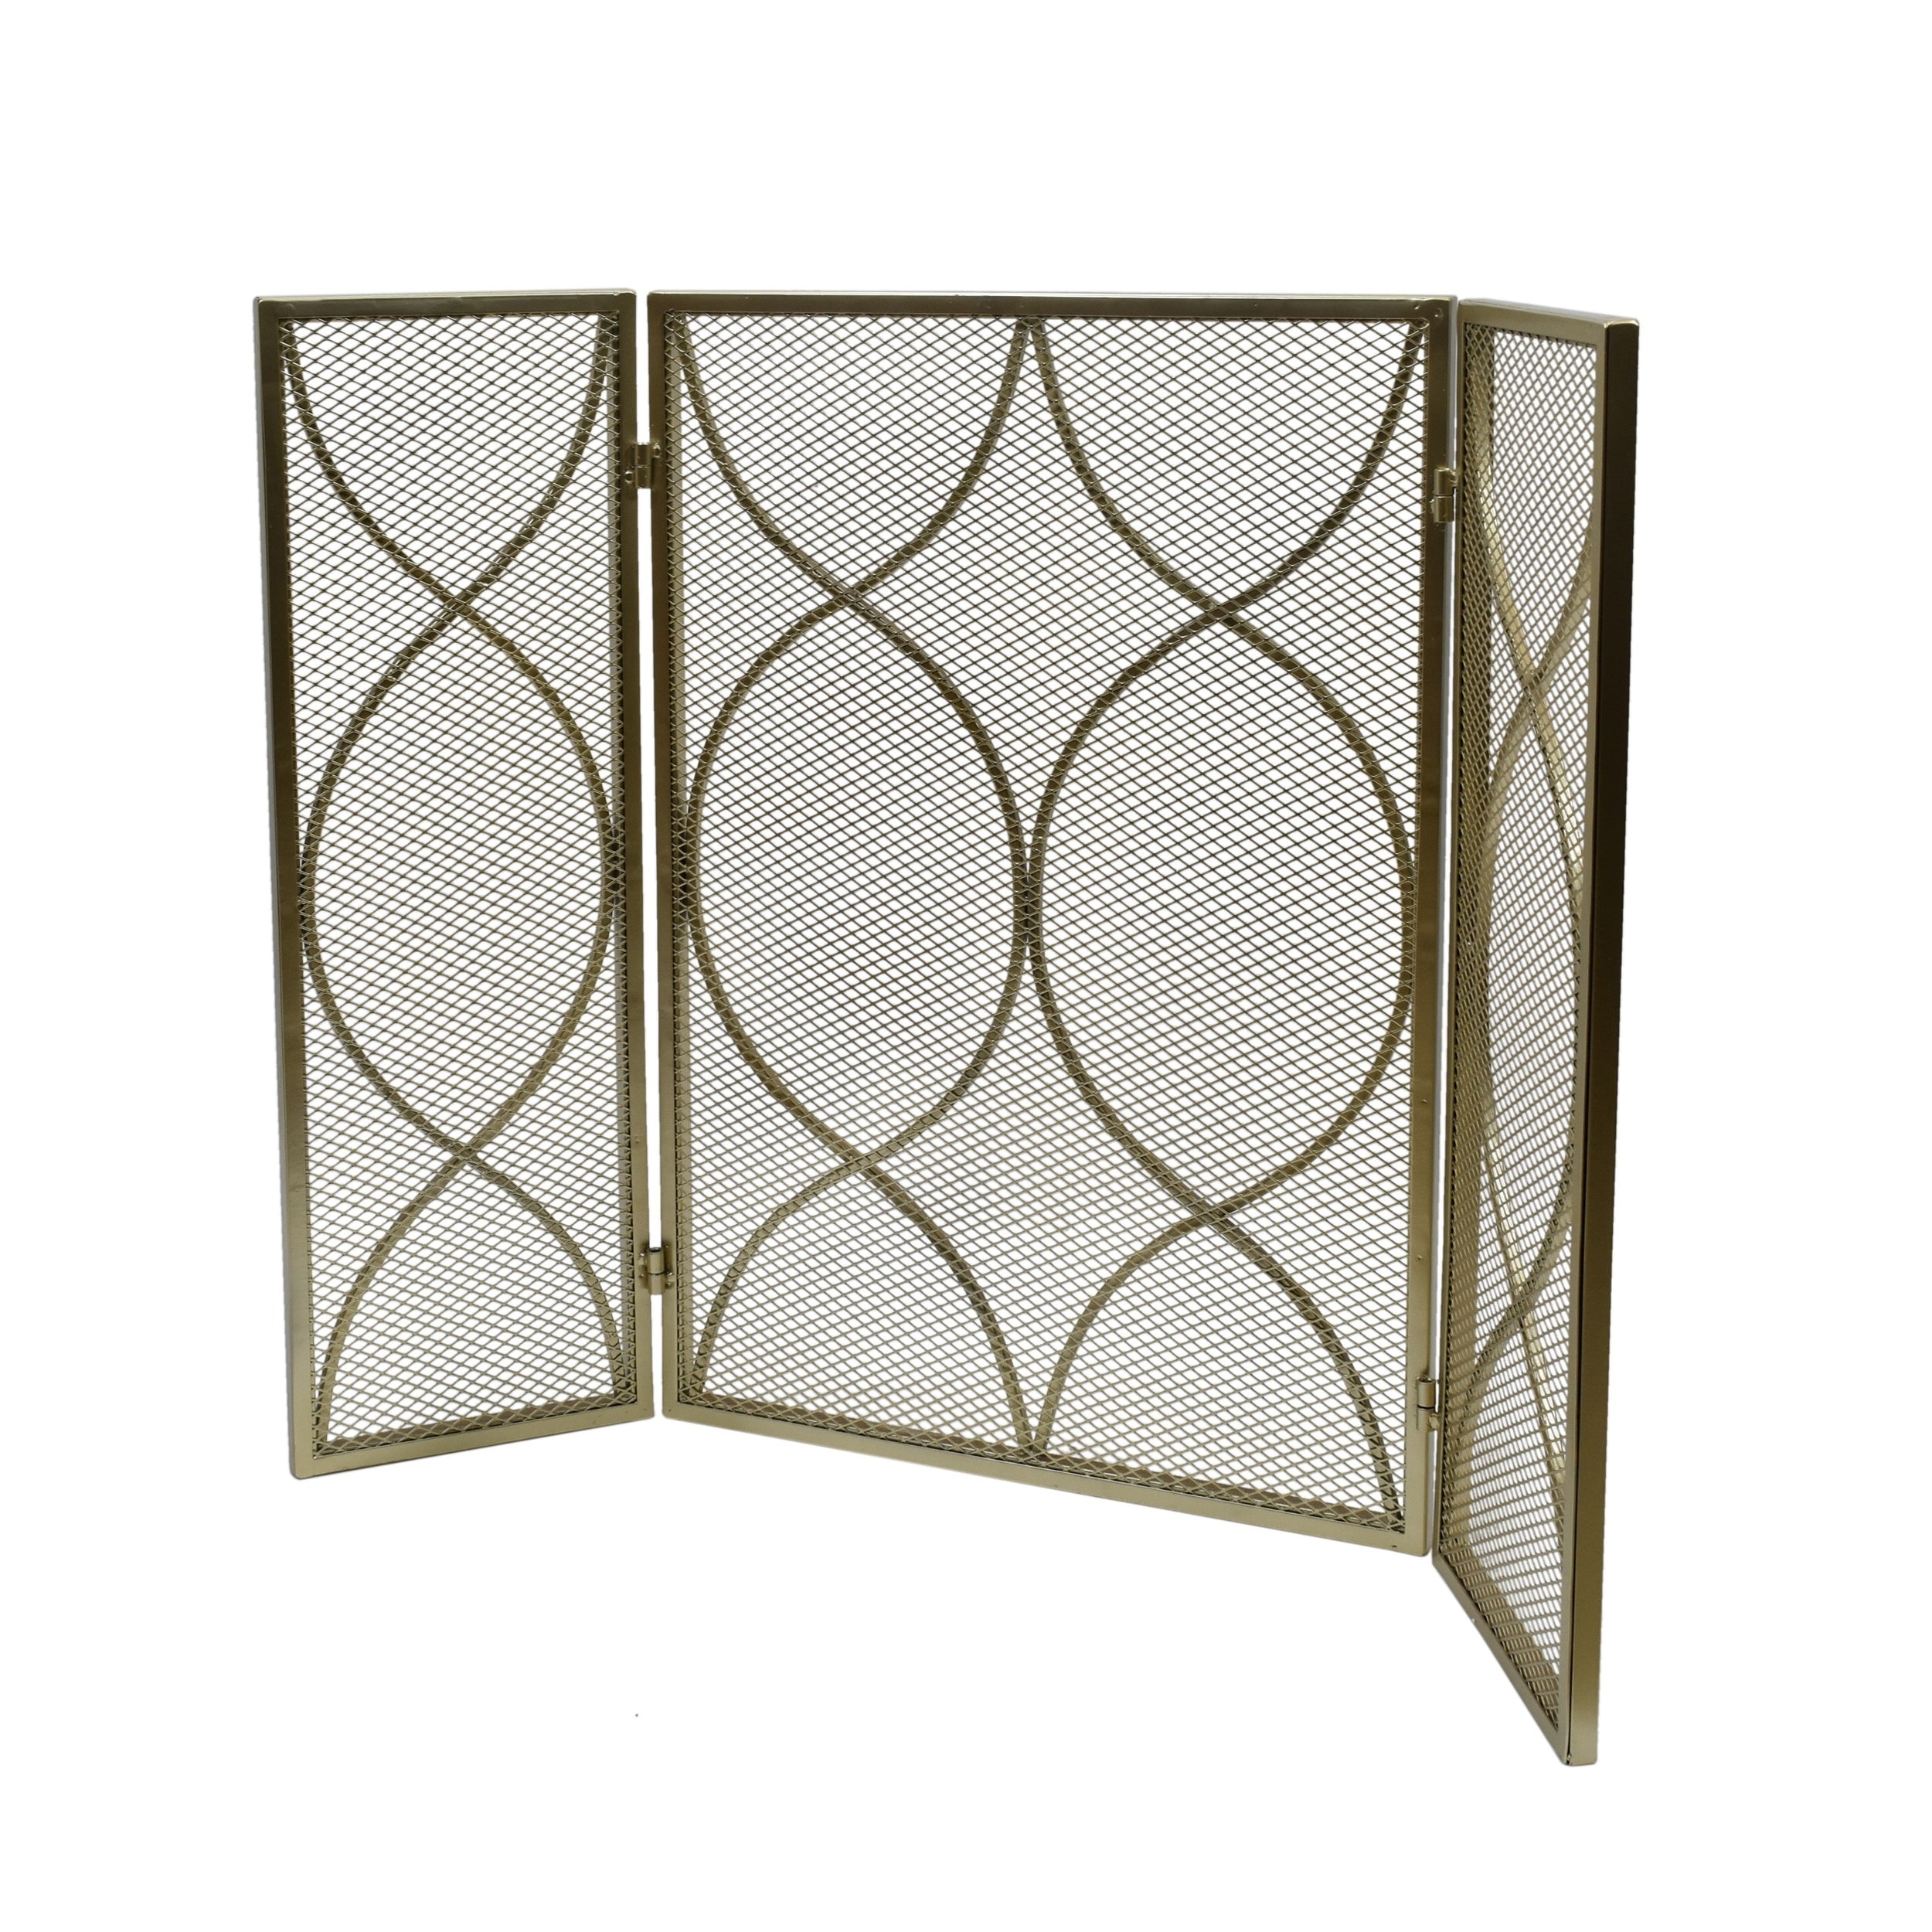 Christopher Knight Home Chelsey Panelled Iron Fireplace Screen, Gold - 3